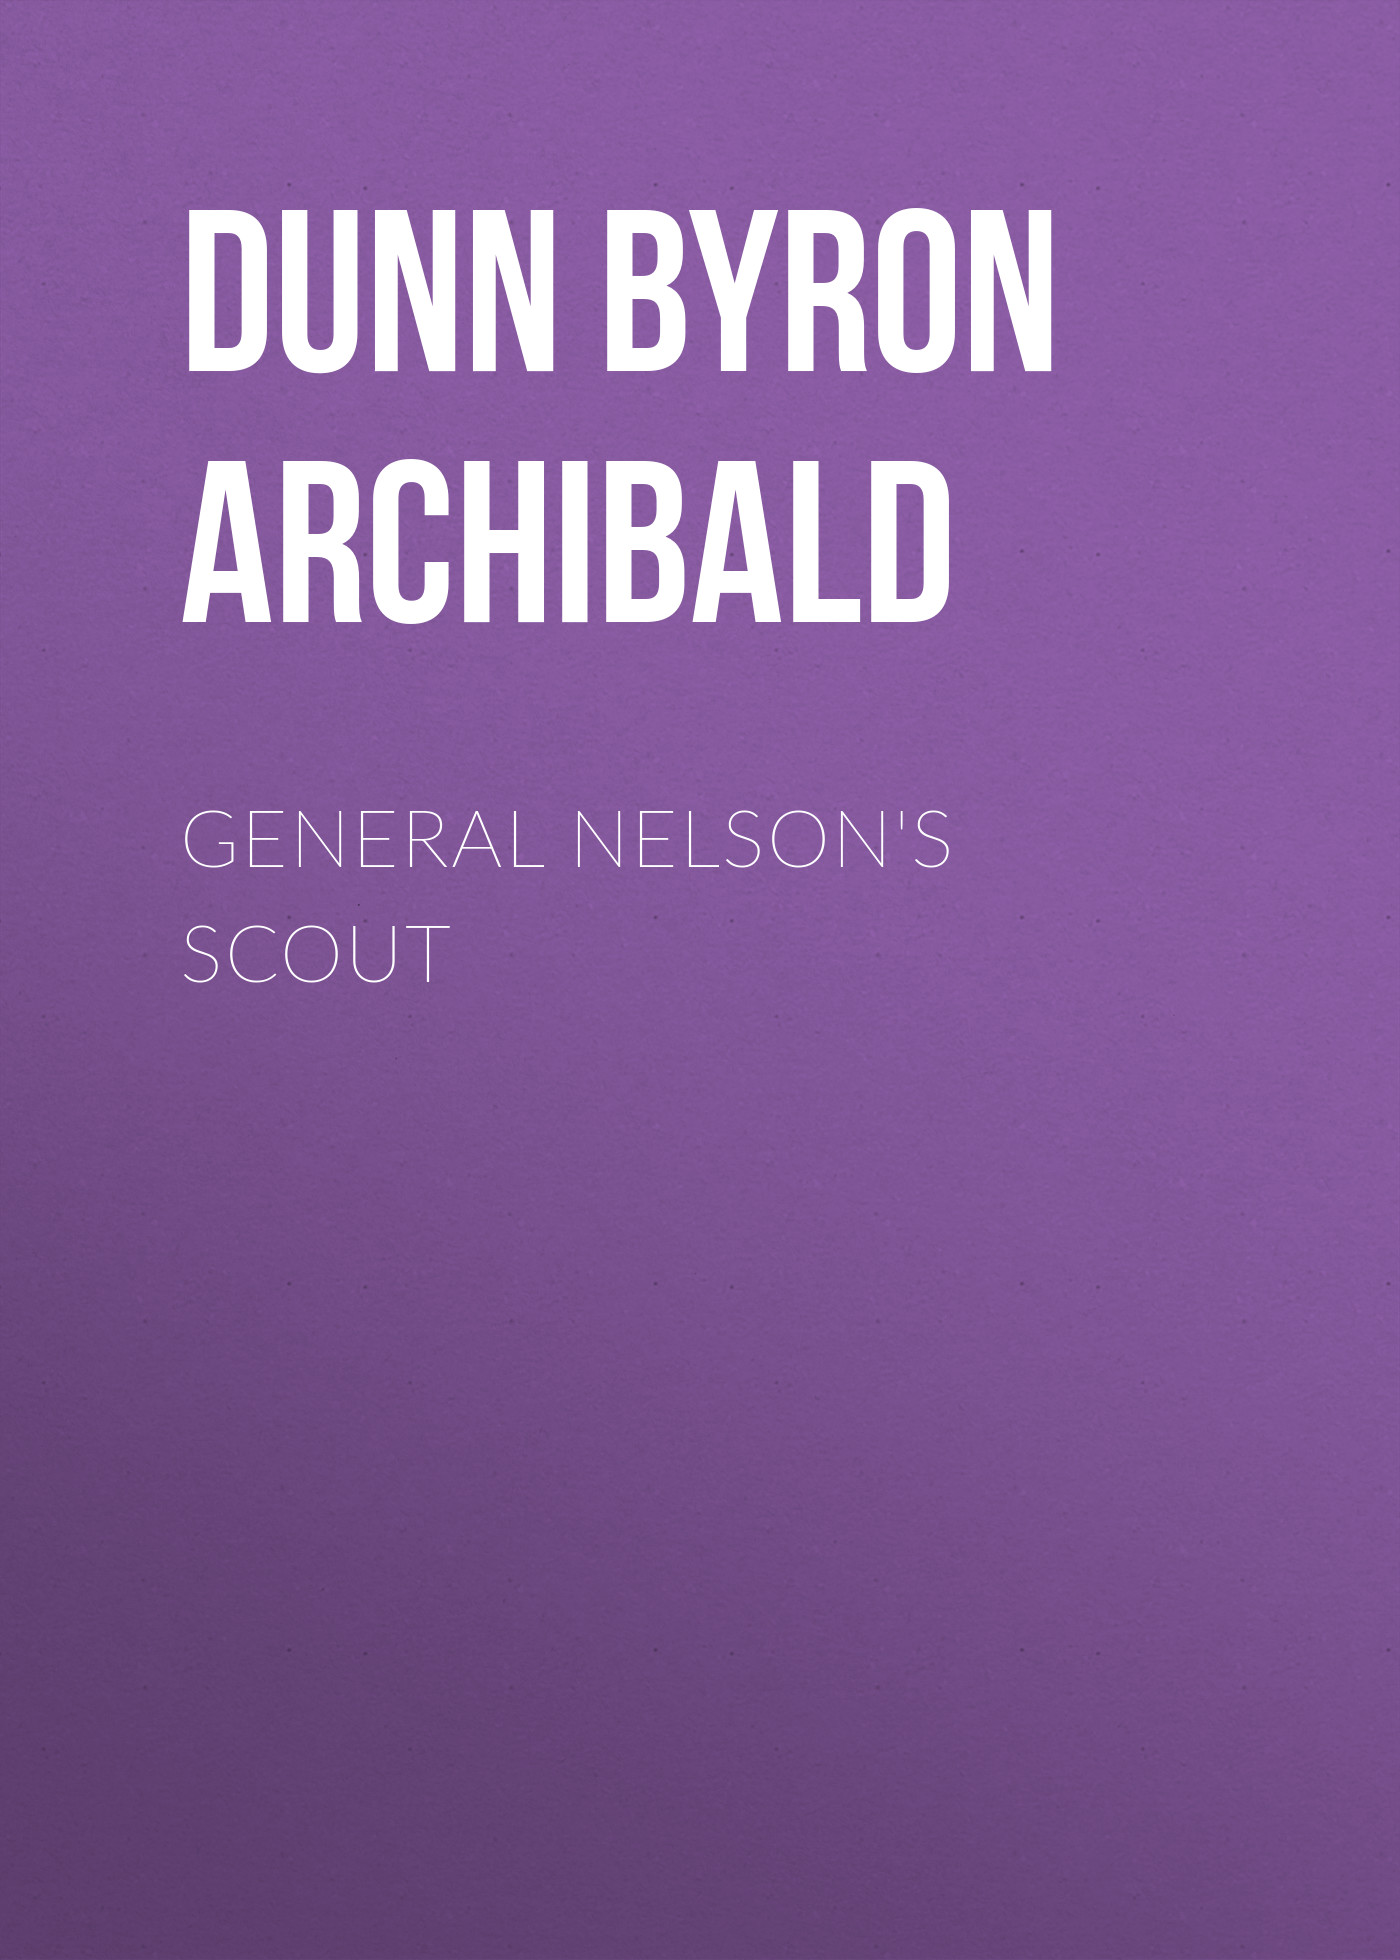 Dunn Byron Archibald General Nelson's Scout